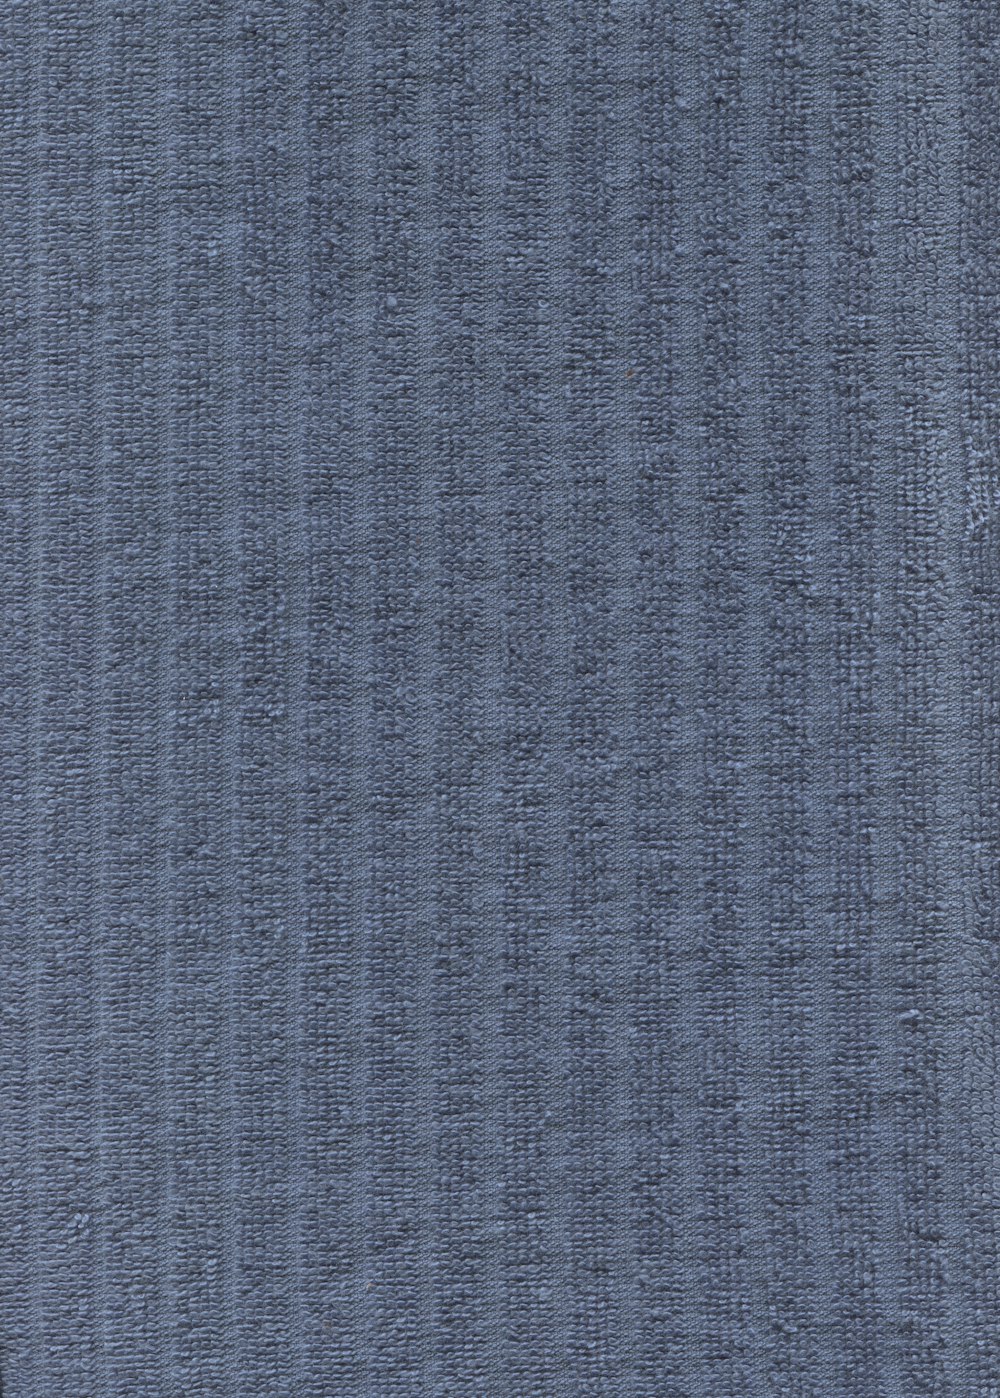 a close up of a blue fabric texture